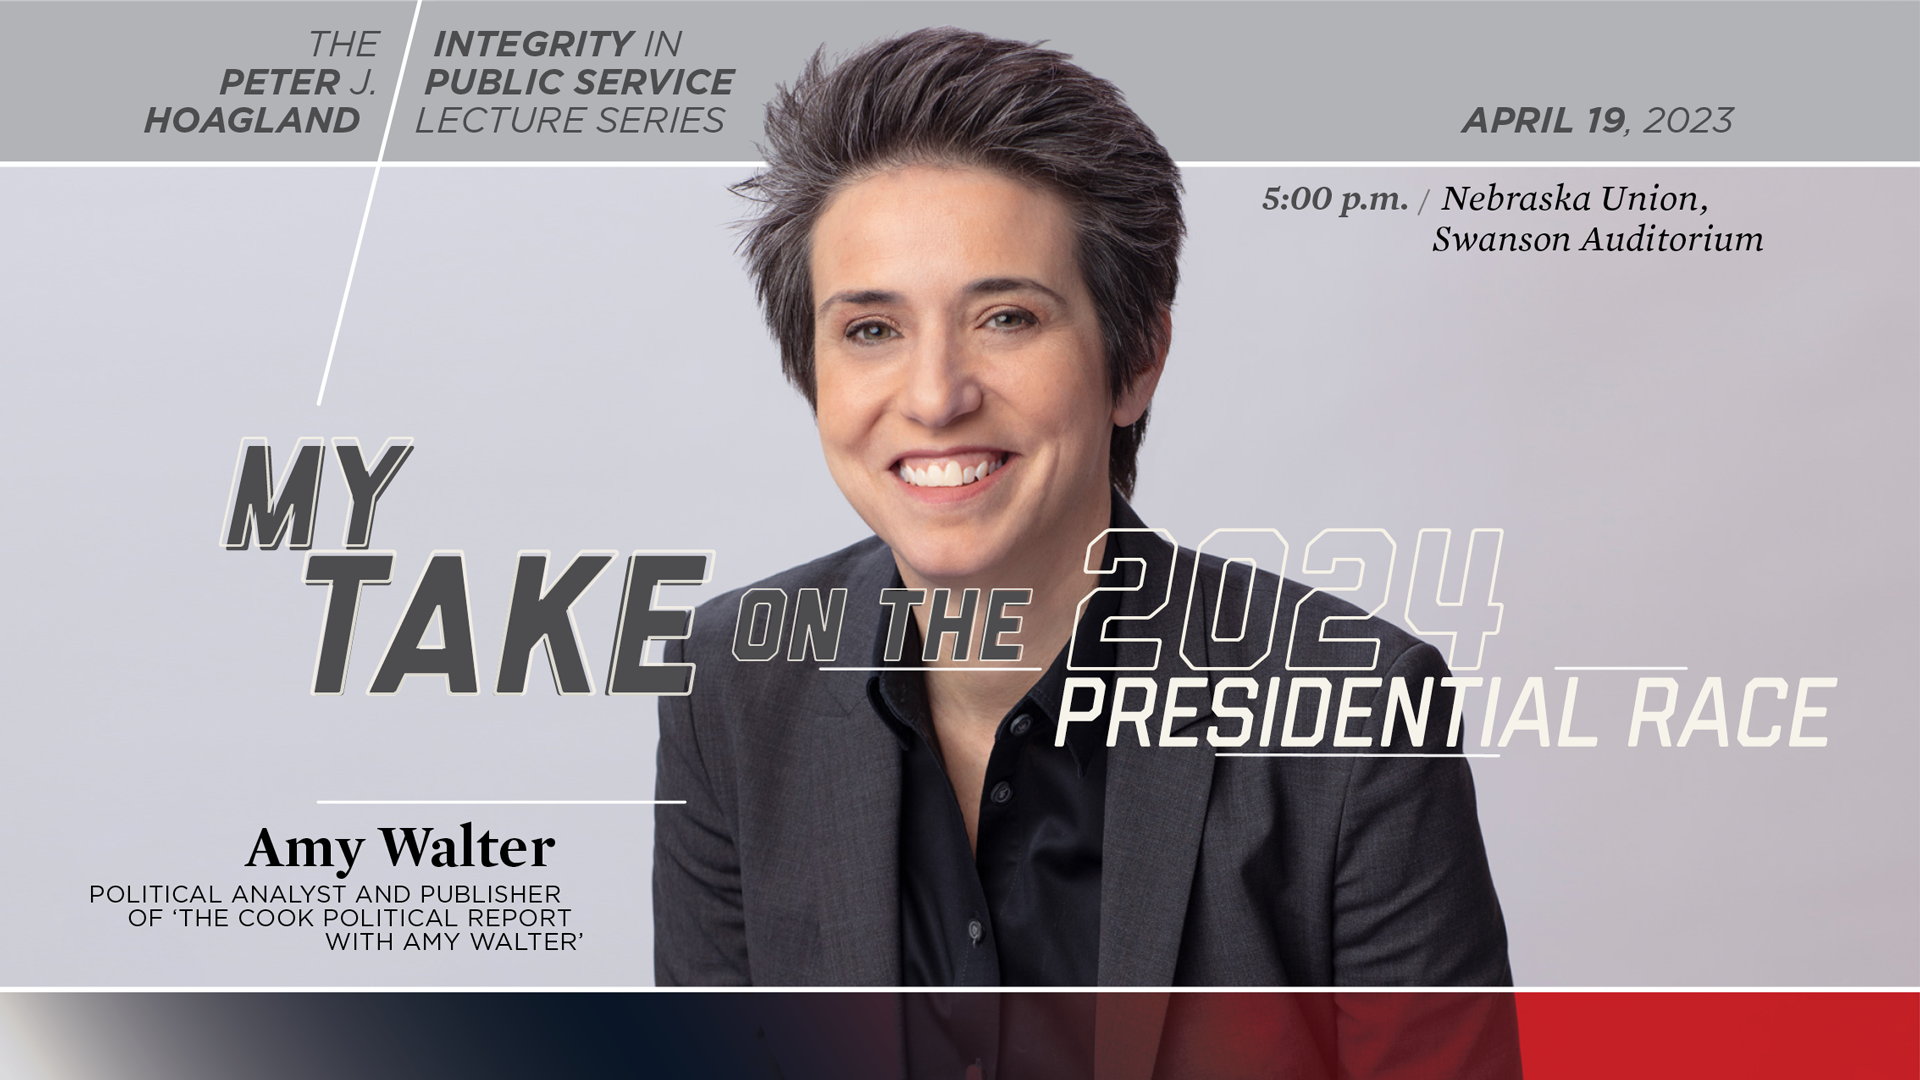 My Taken on the 2024 Presidential Election featuring Amy Walter